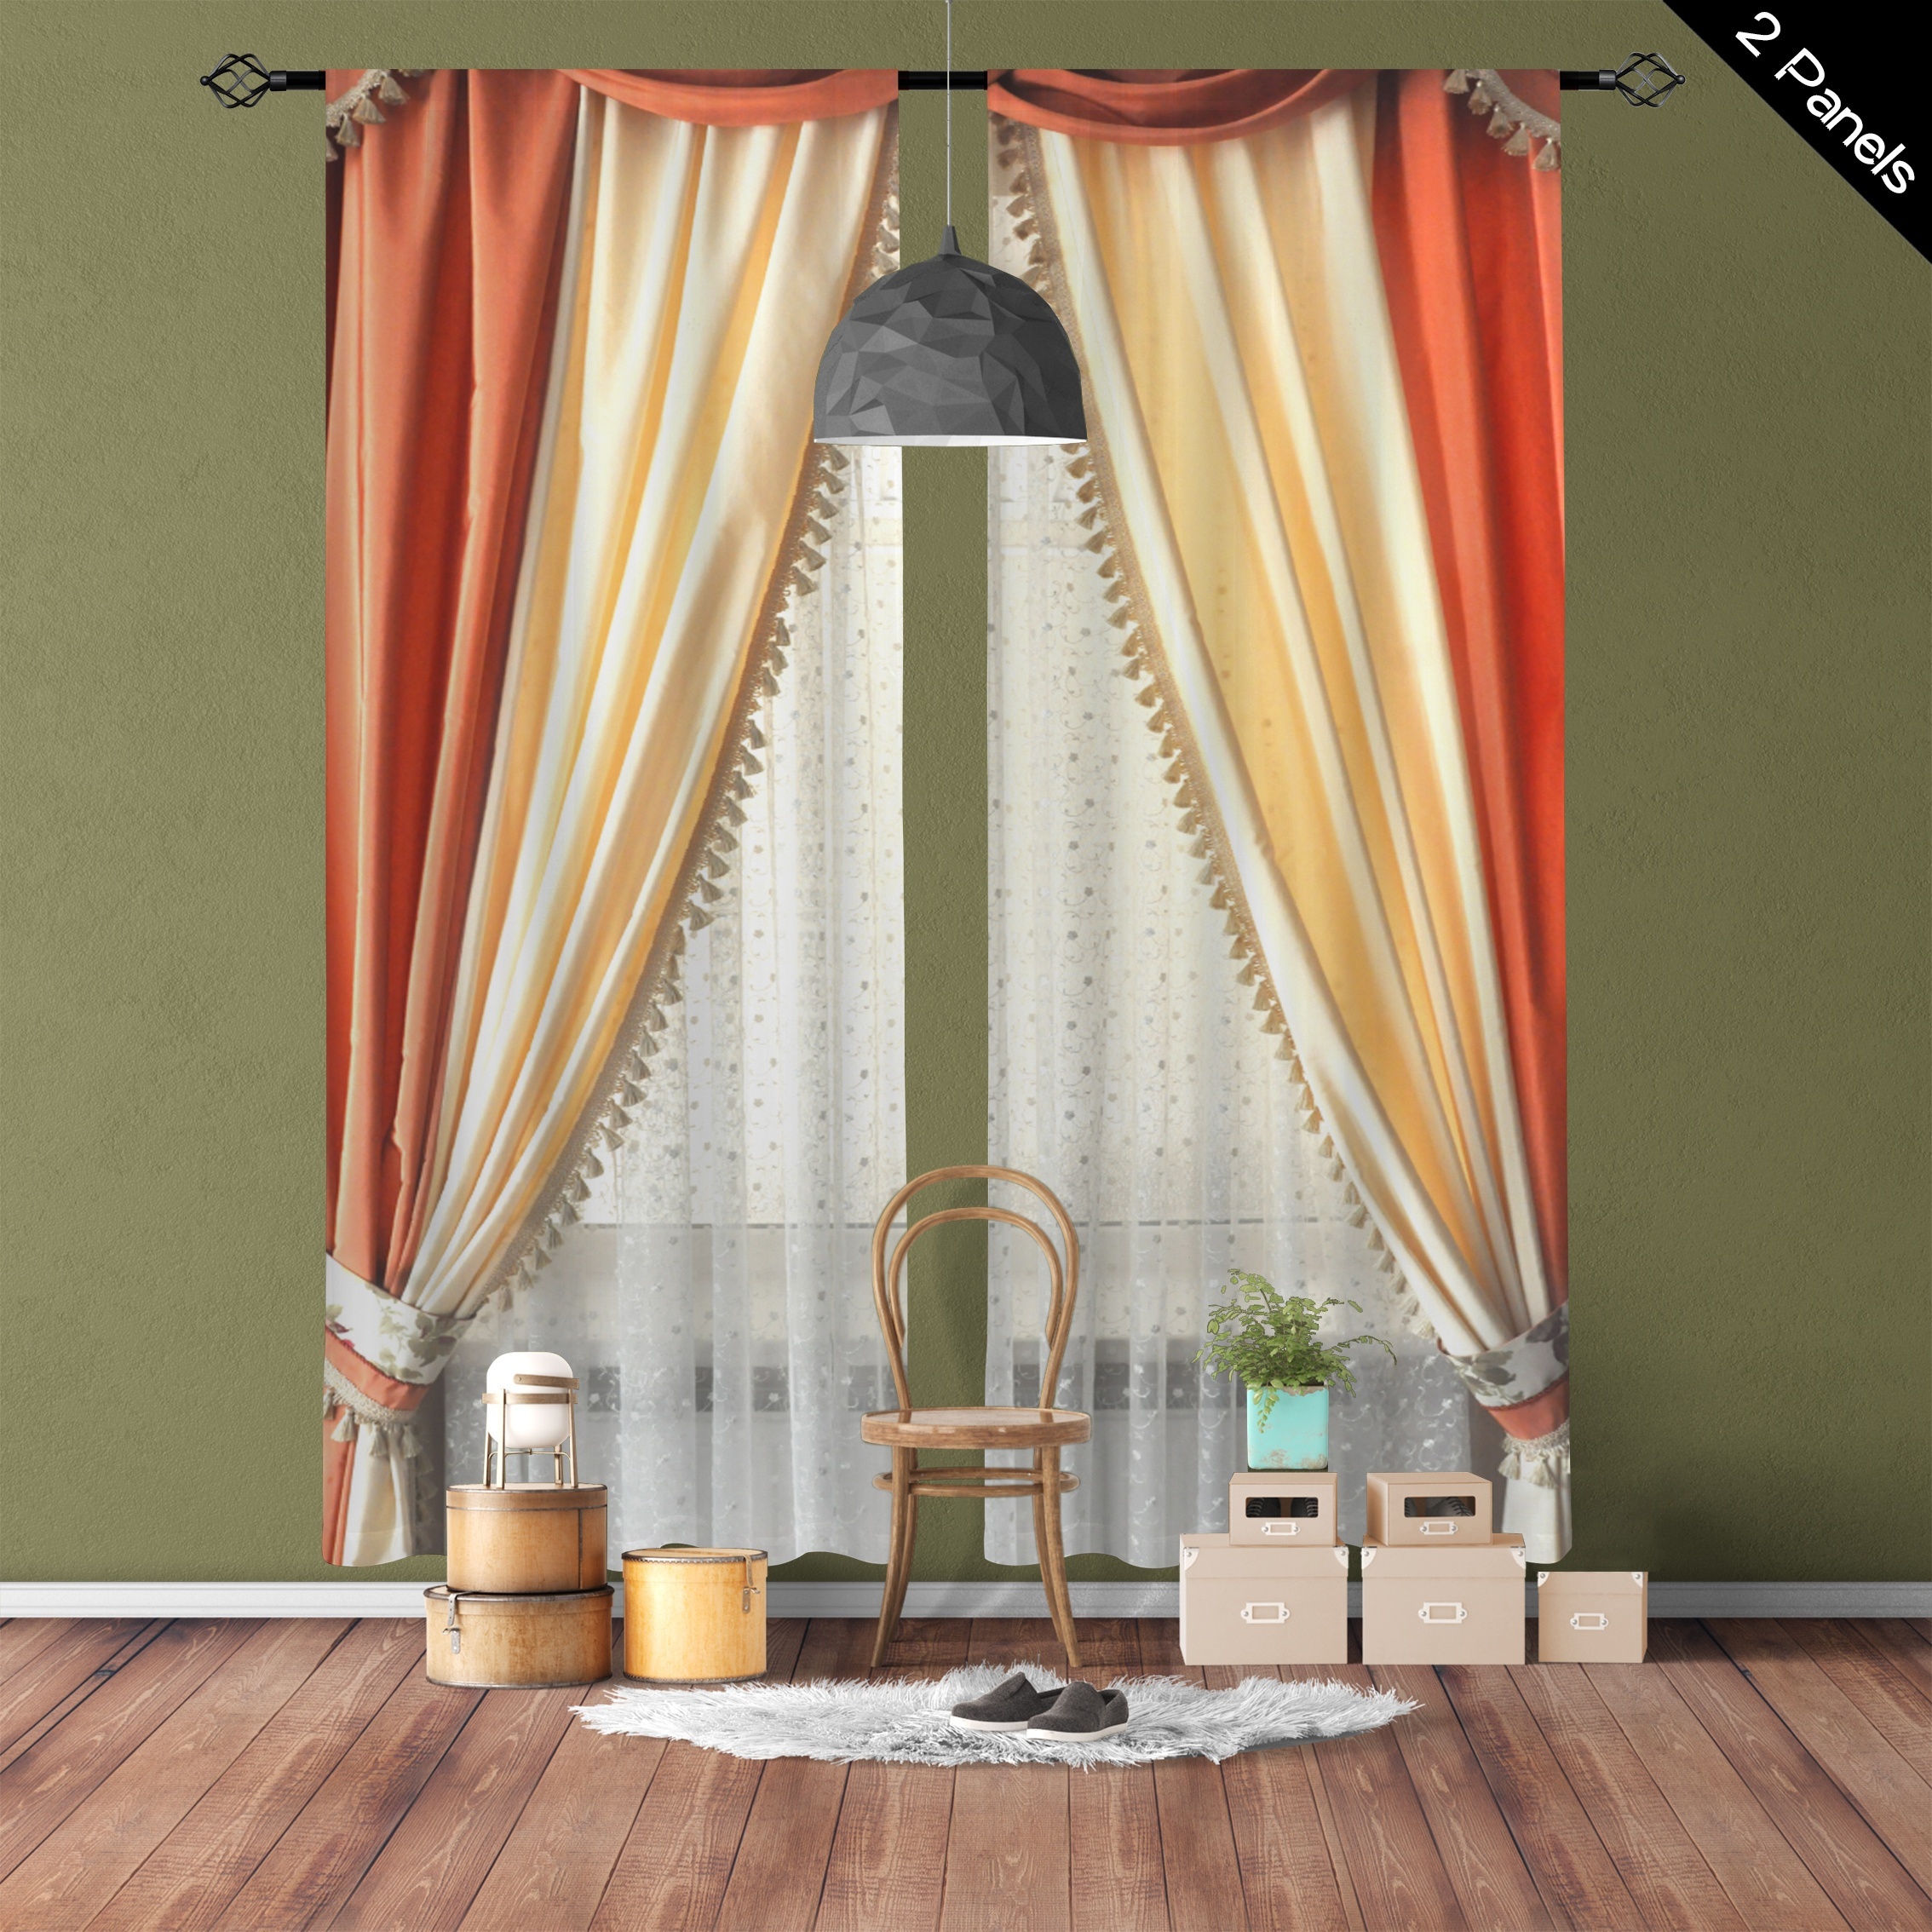 

2pcs, Printed Translucent Curtains Orange Yarn Curtain, Multi-scene Polyester Rod Pocket Decorative Curtains For Living Room Gaming Room Bedroom, Home Decor Party Supplies